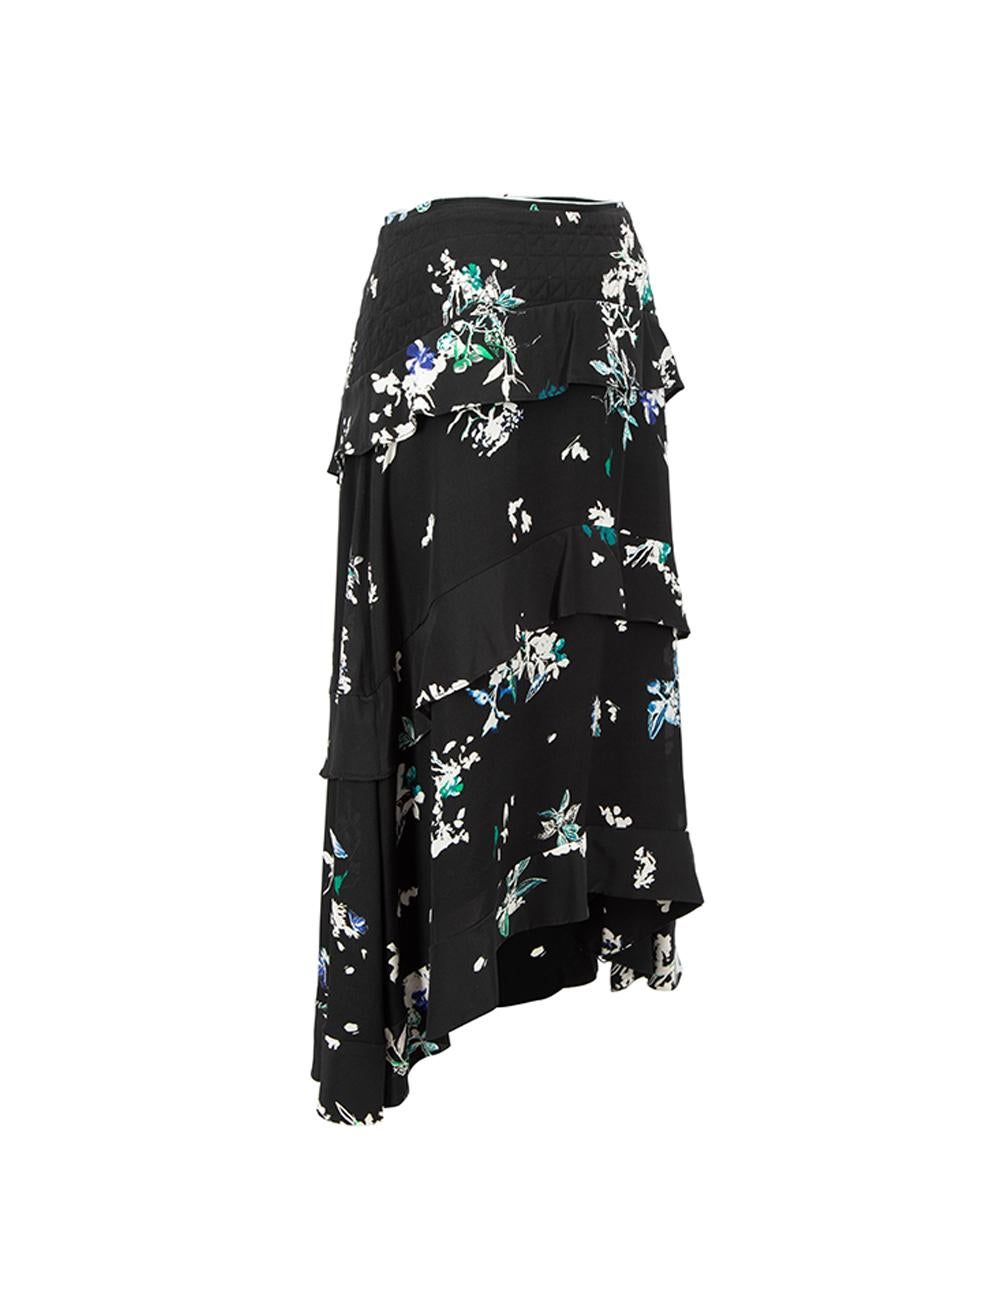 CONDITION is Very good. Hardly any visible wear to skirt is evident on this used Proenza Schouler designer resale item. 
 
 Details
  Black
 Silk
 Tiered midi skirt
 Floral pattern
 Quilted panel waistband
 Back zip closure with hook and eye
 
 
